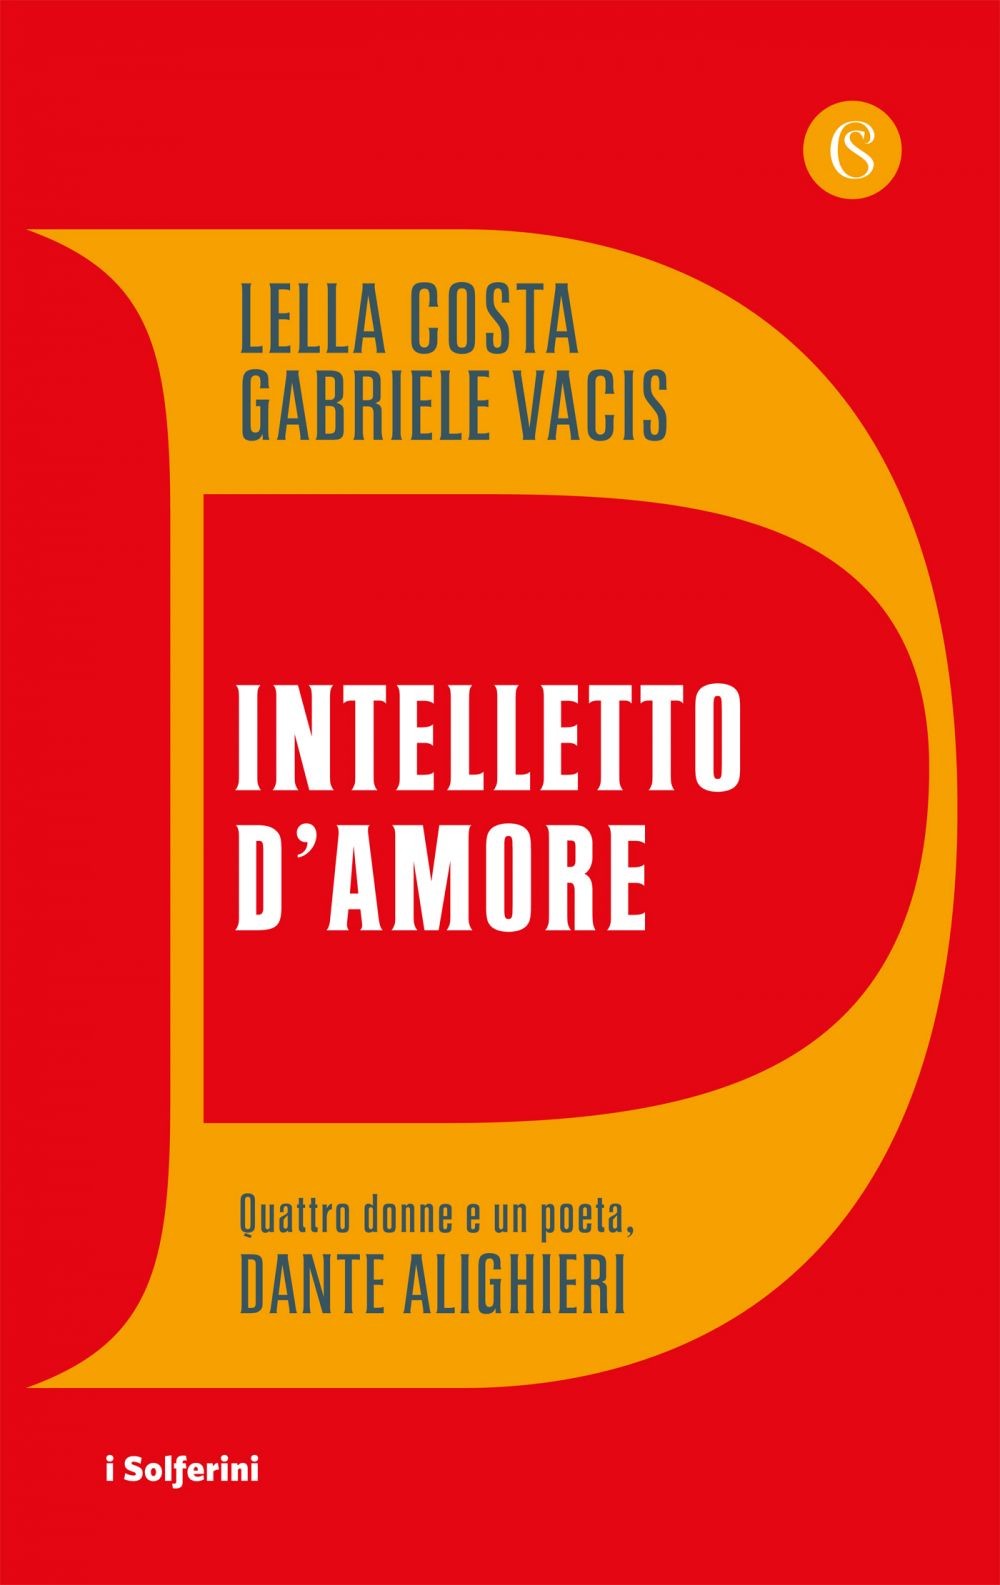 Intelletto d'amore - Librerie.coop